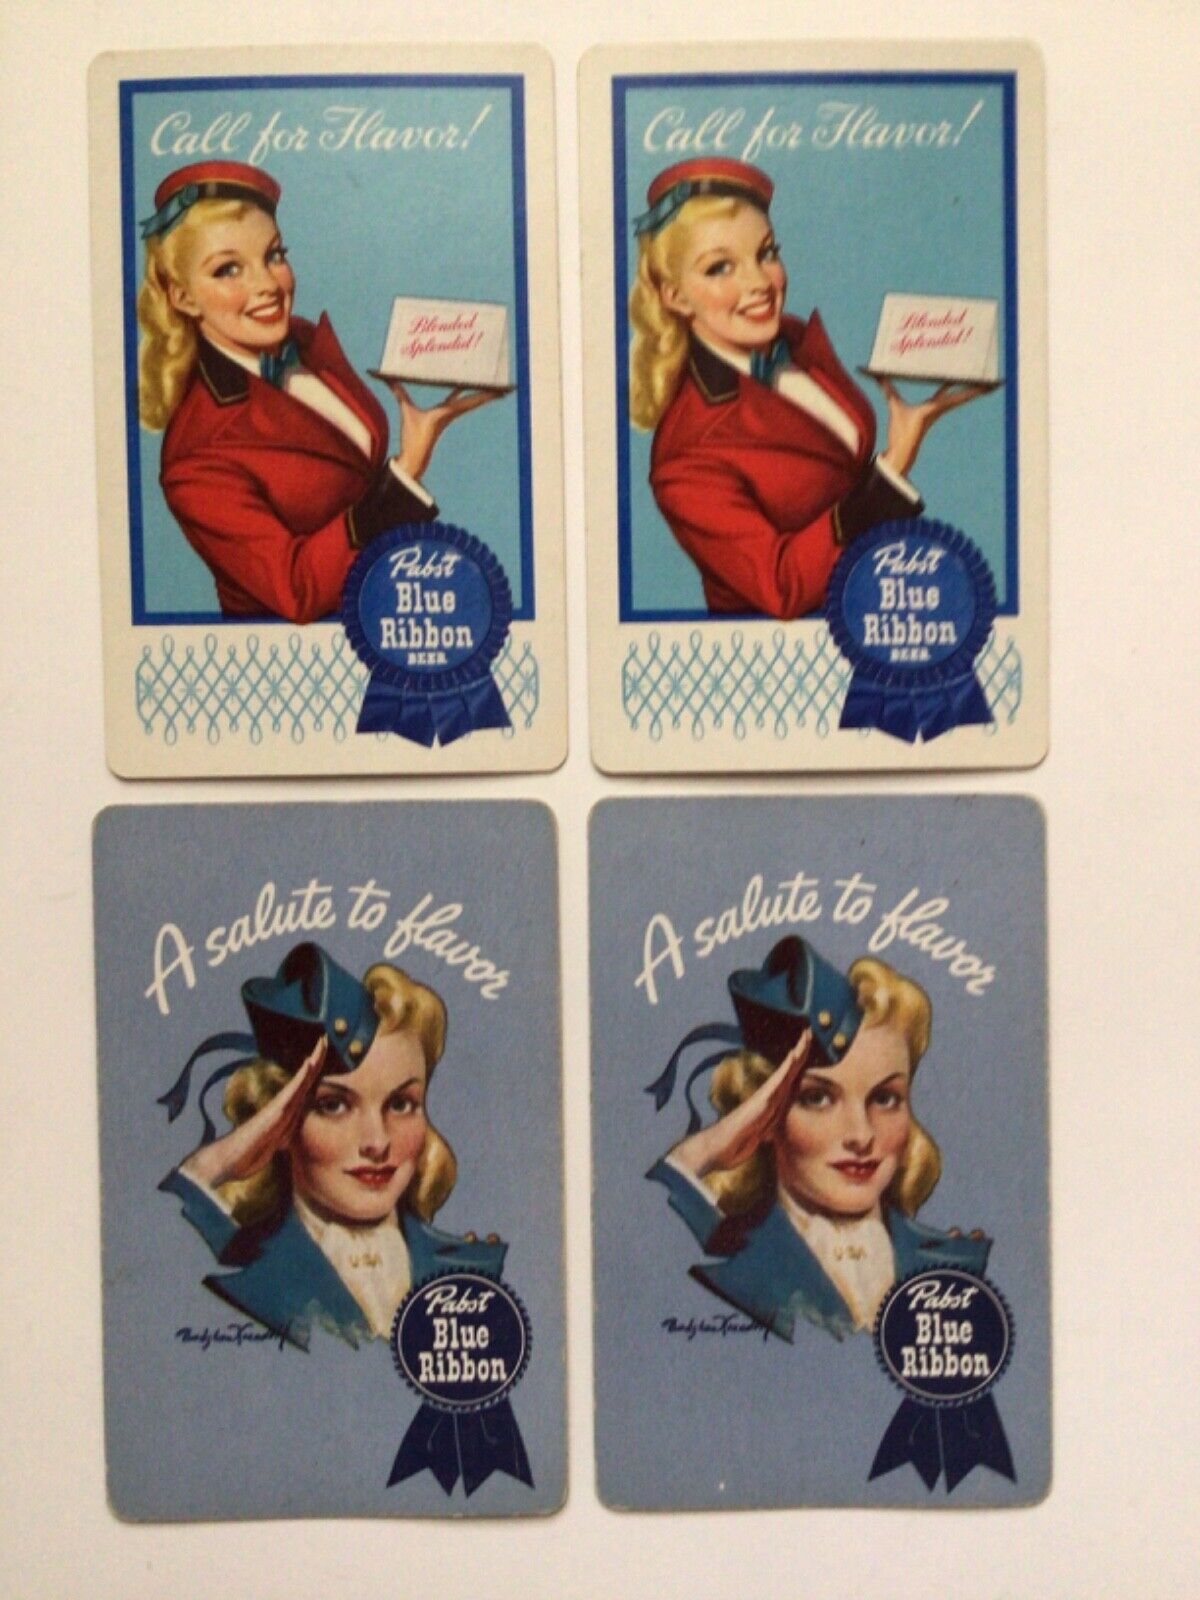 (4) Vintage “PABST BLUE RIBBON” Beer Advertising Playing Cards c.1940’s